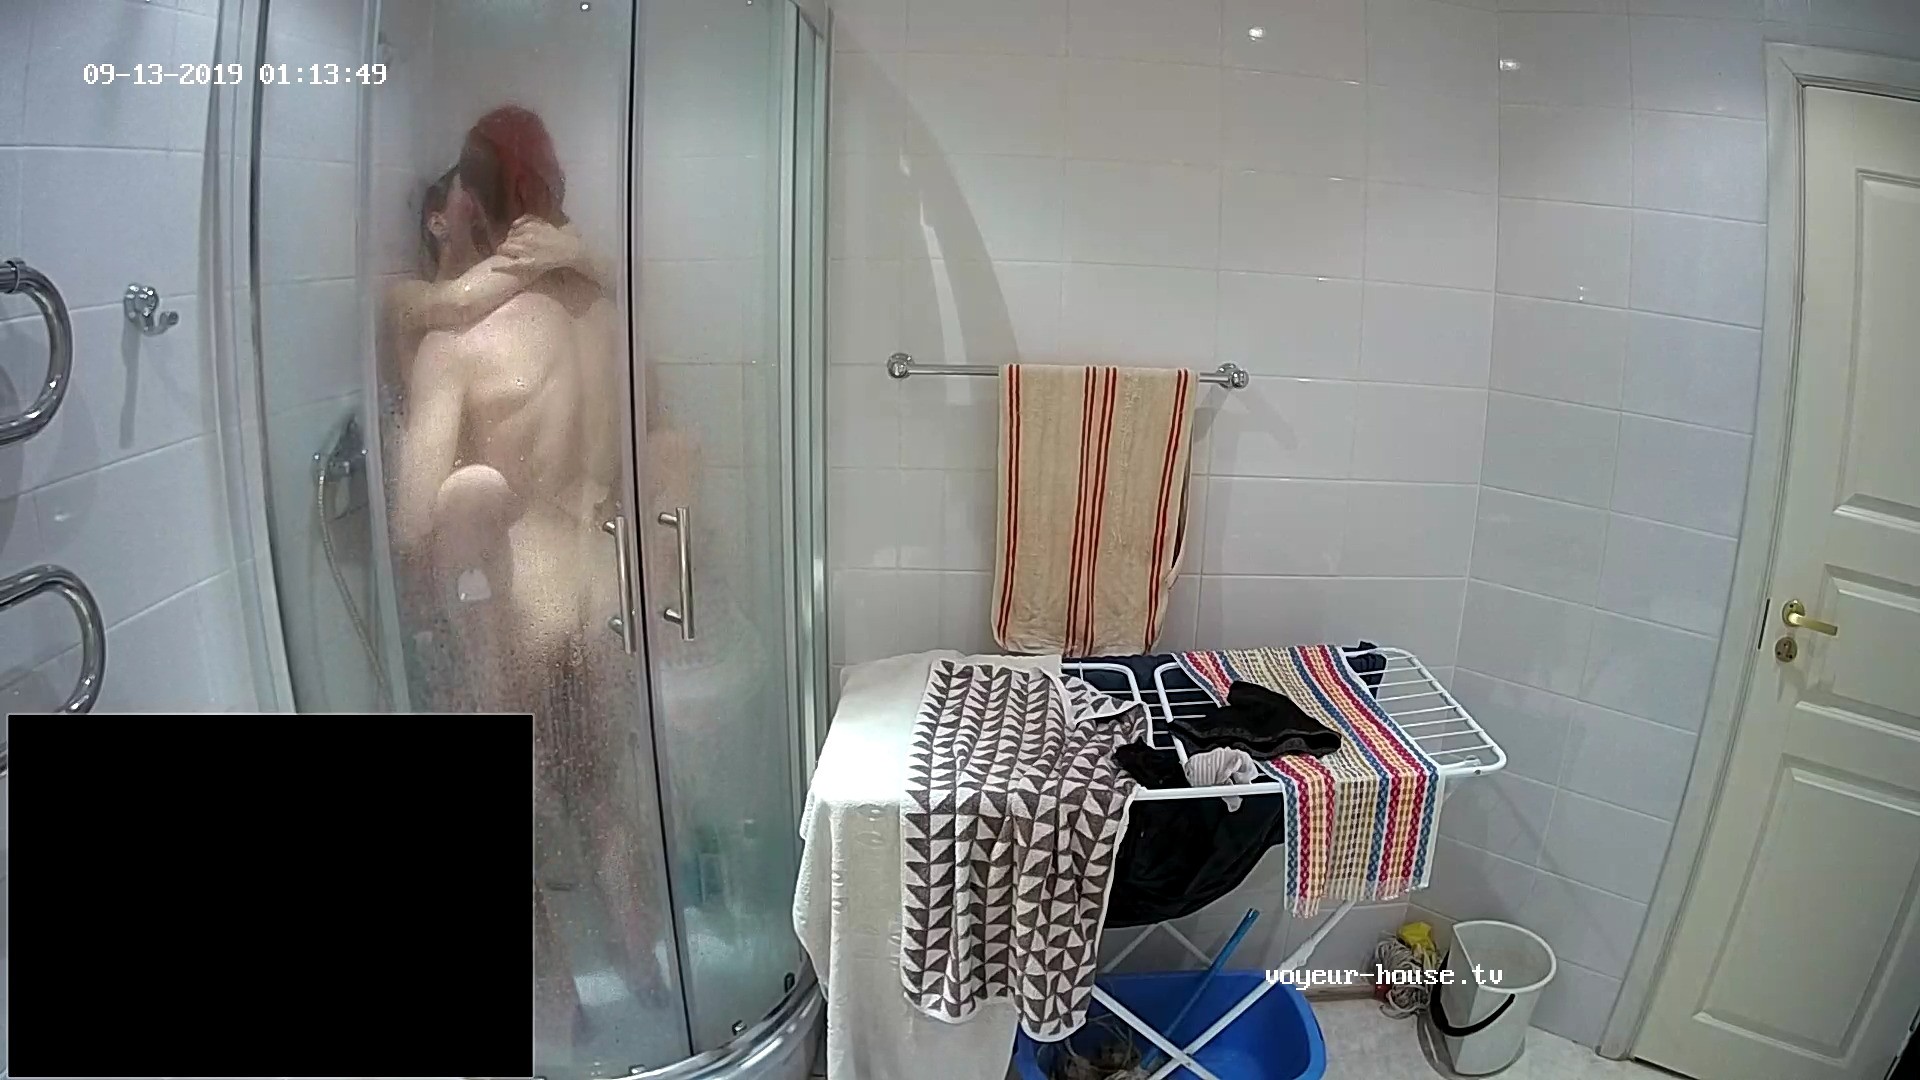 Guest Couple Sex in shower 13 Sep 2019